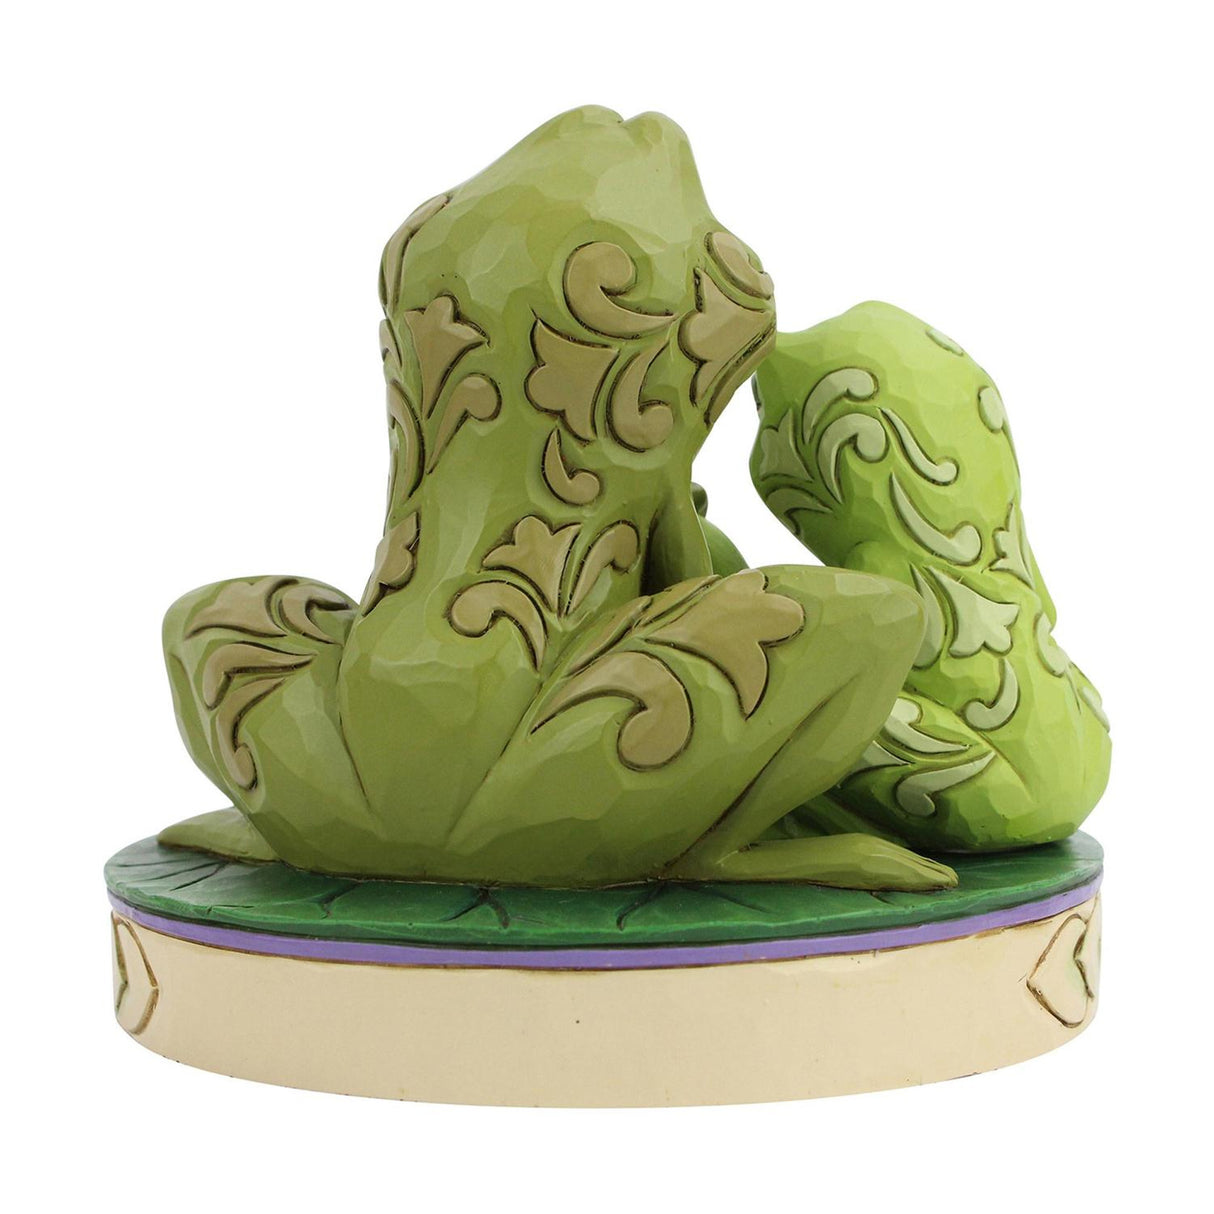 Disney Traditions - Tiana and Naveen as Frogs Figurine